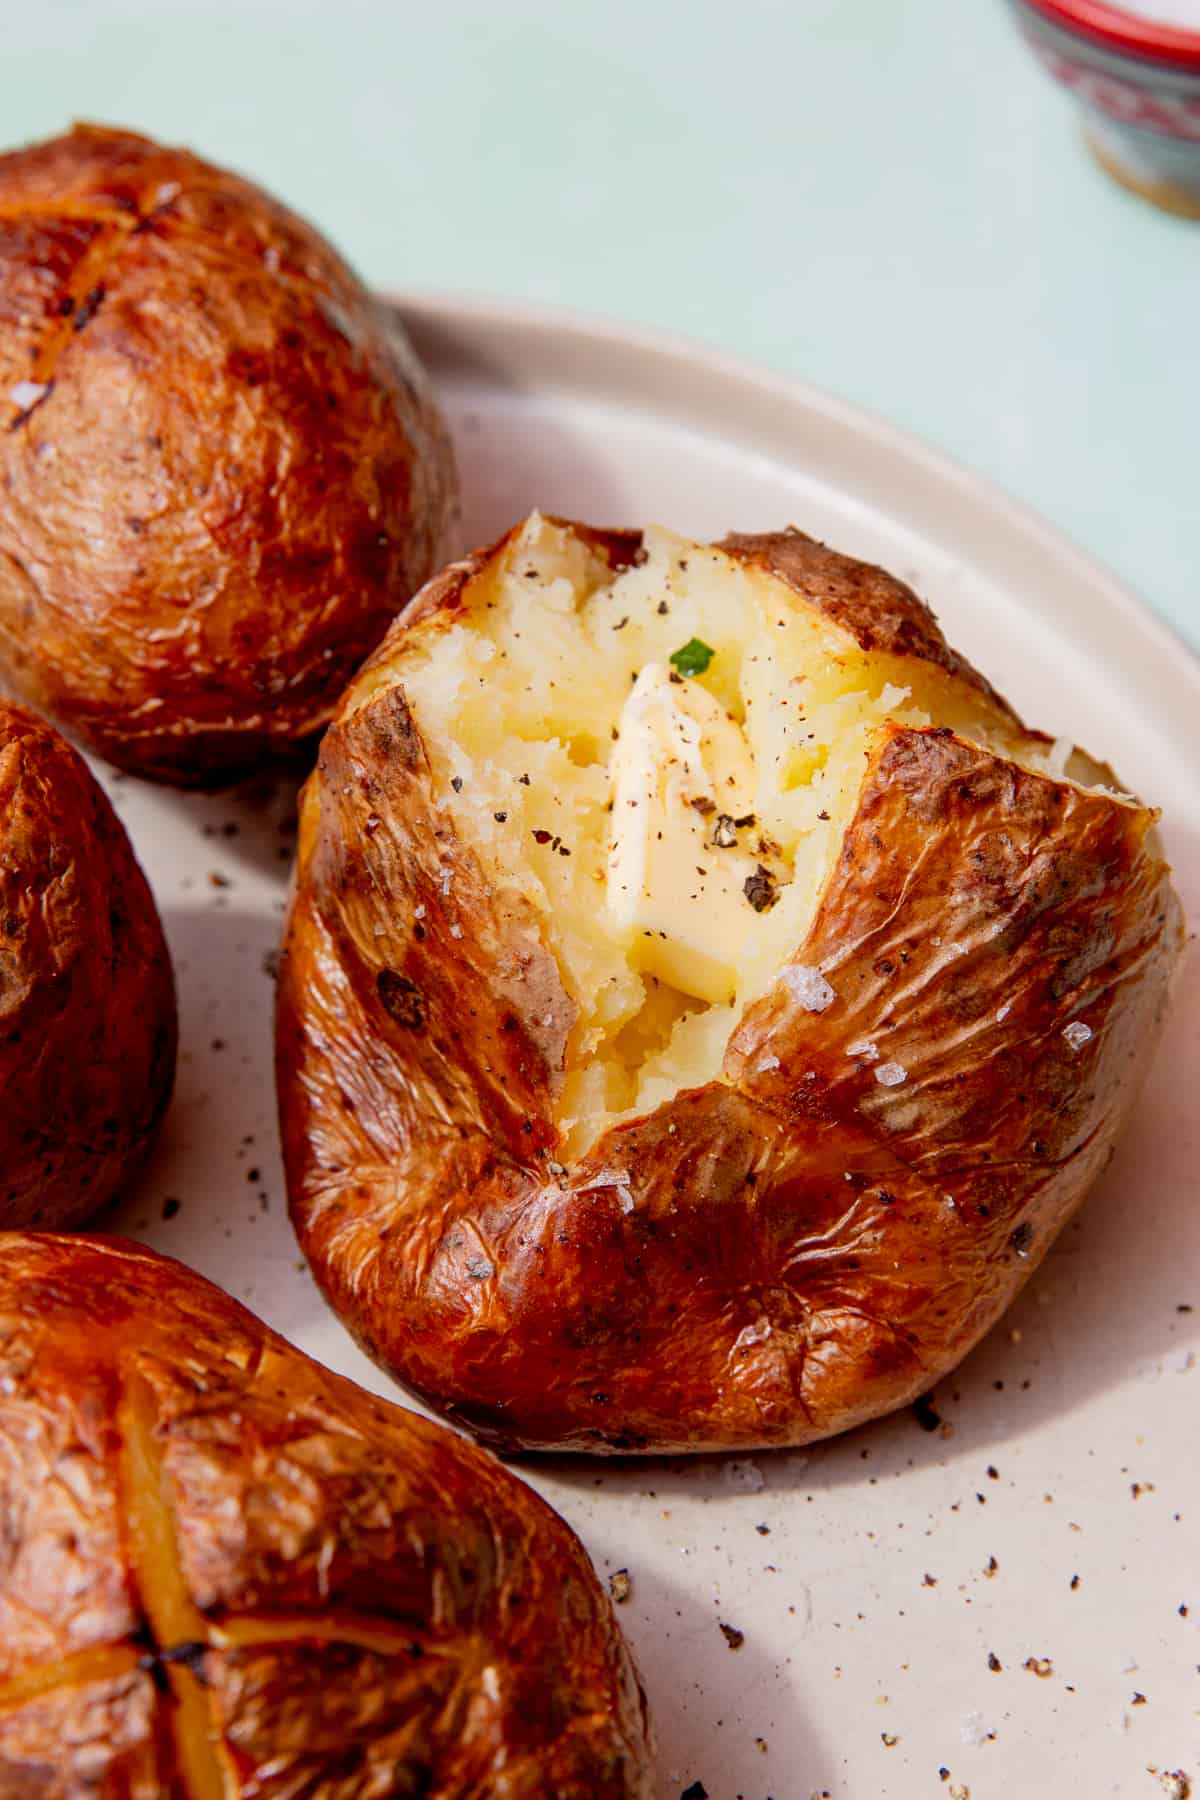 Roasted jacket potatoes on a plate, one opened with a dollop of butter.